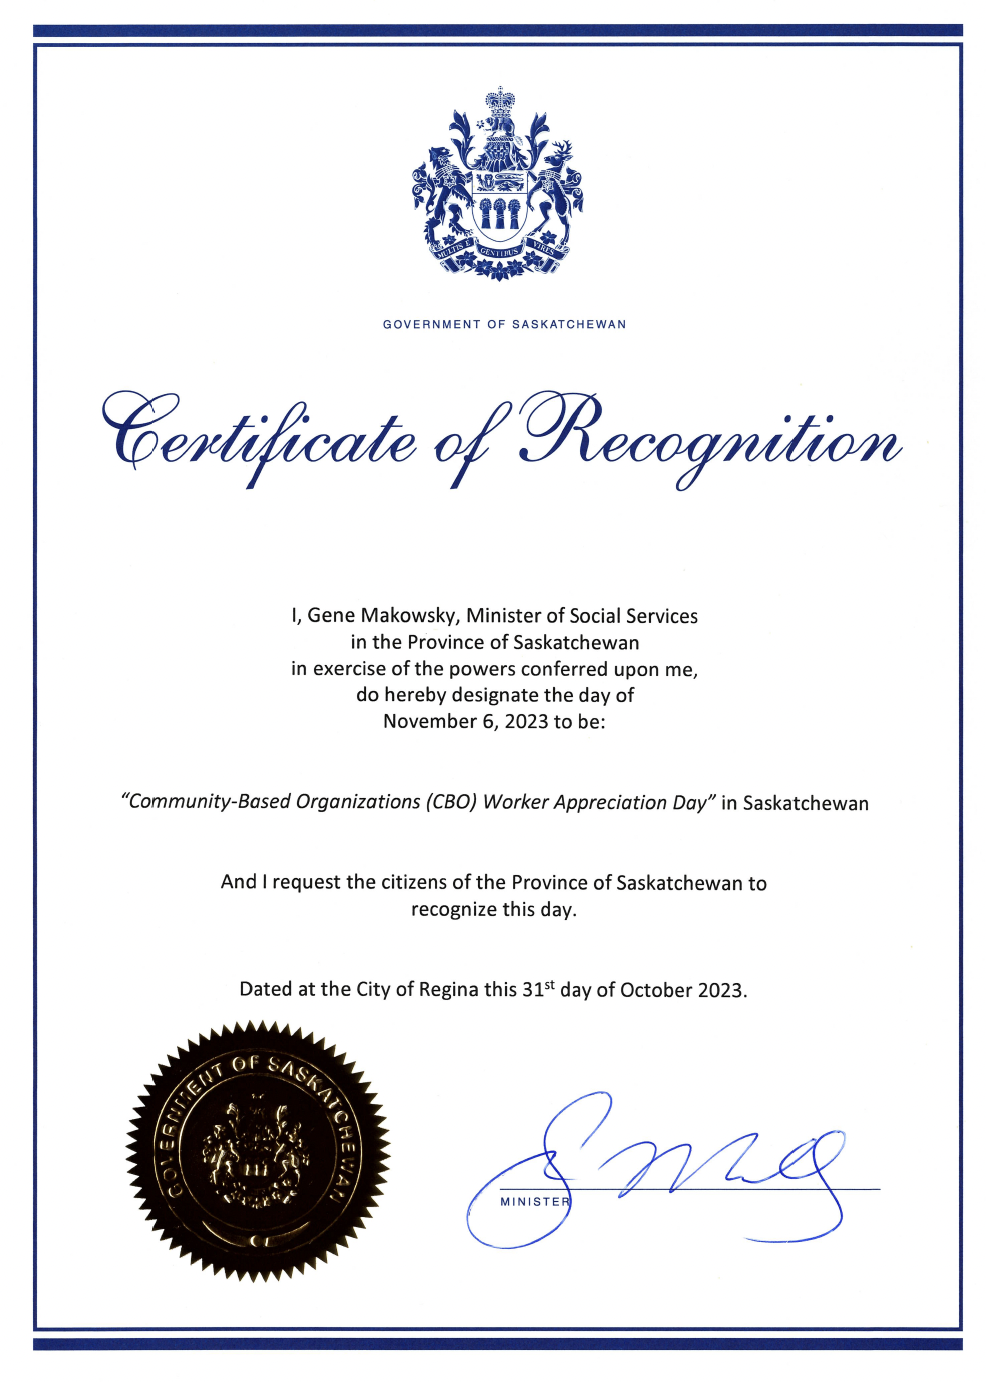 Certificate of Recognition for workers in community-based organizations